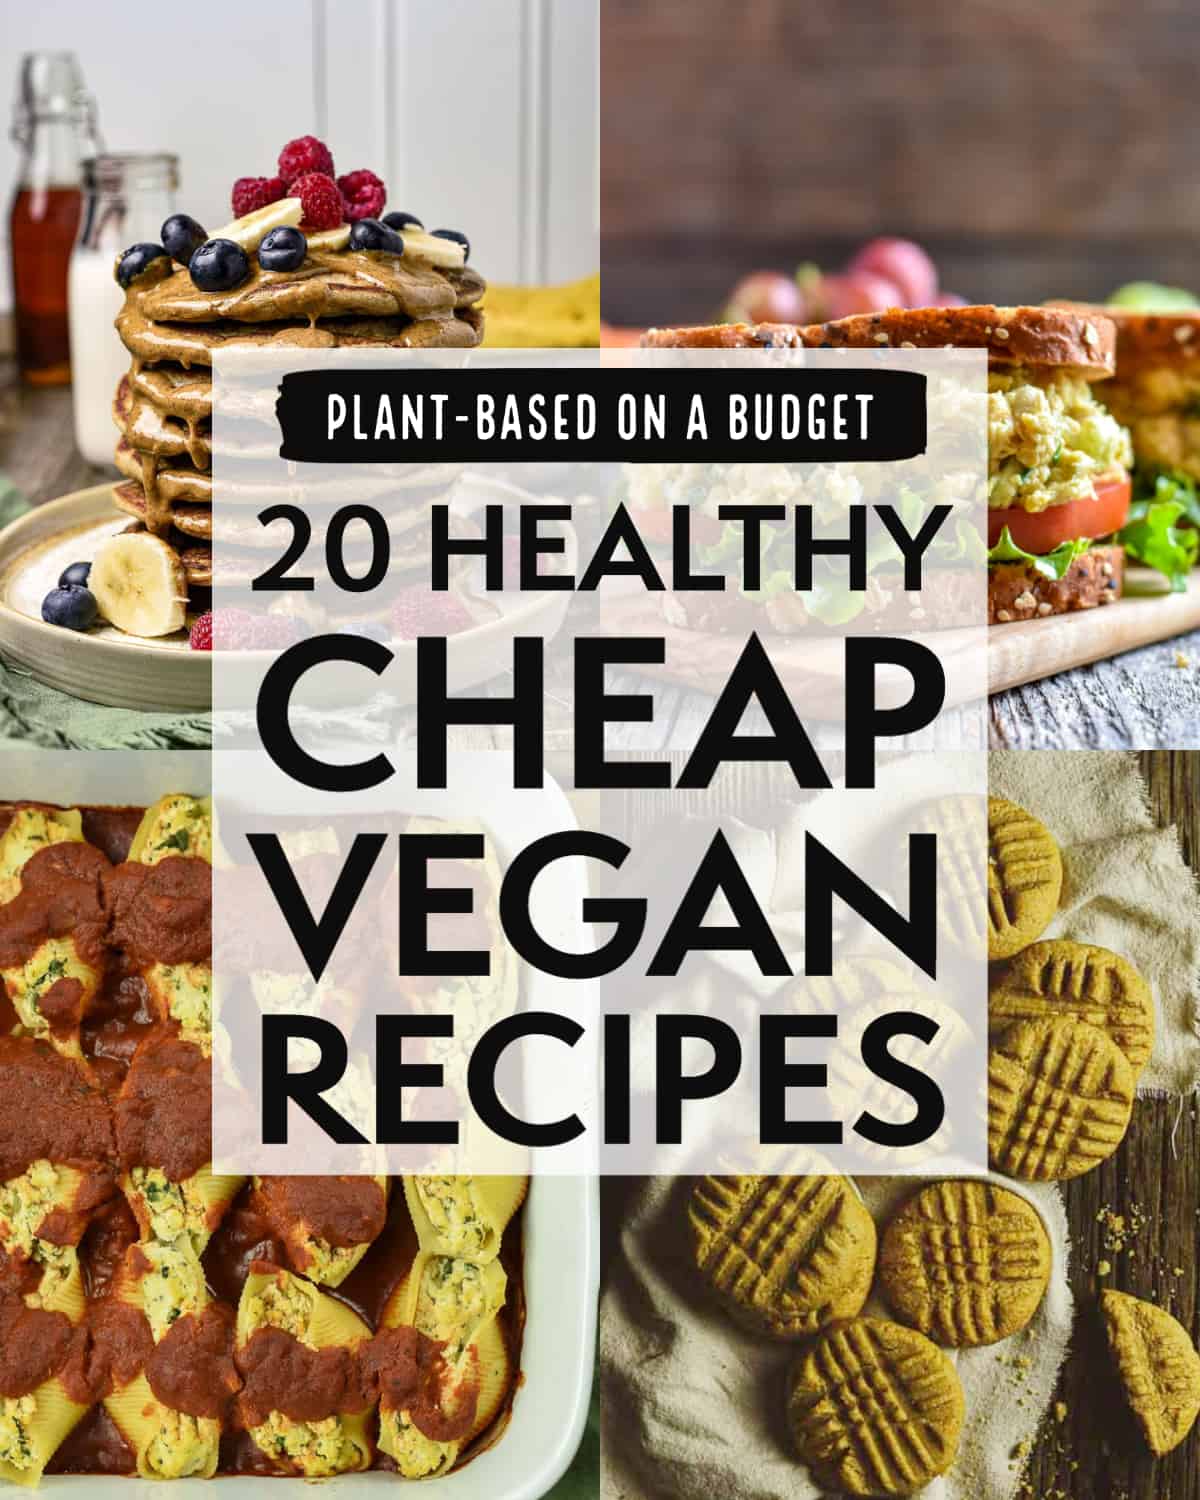 Plant-based on a budget. 20 Healthy cheap vegan recipes.